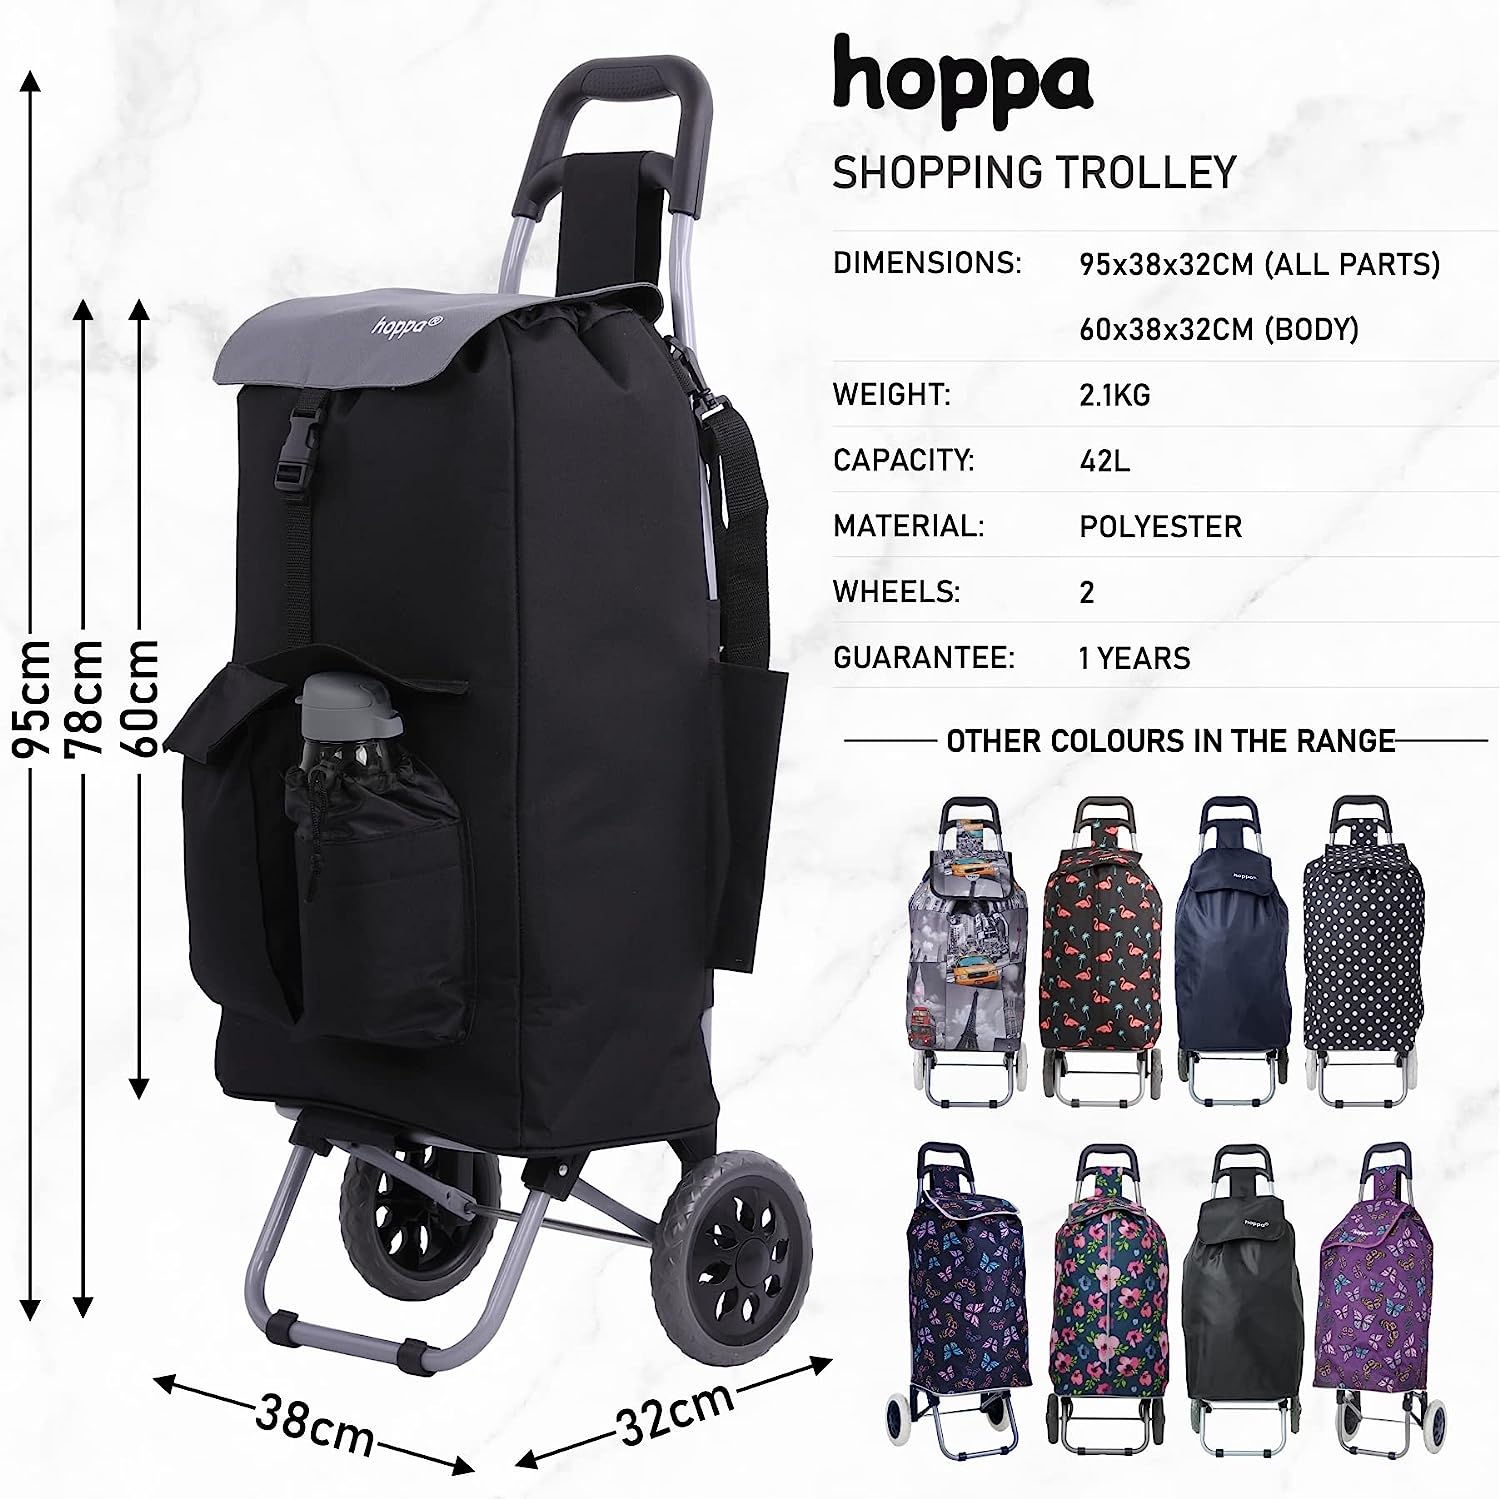 Hoppa Fully Insulated Lightweight 2023 Model 2 Wheeled Large 42-Litre Capacity Shopping Trolley Bag 95cm, 2.1kg with Shoulder Strap